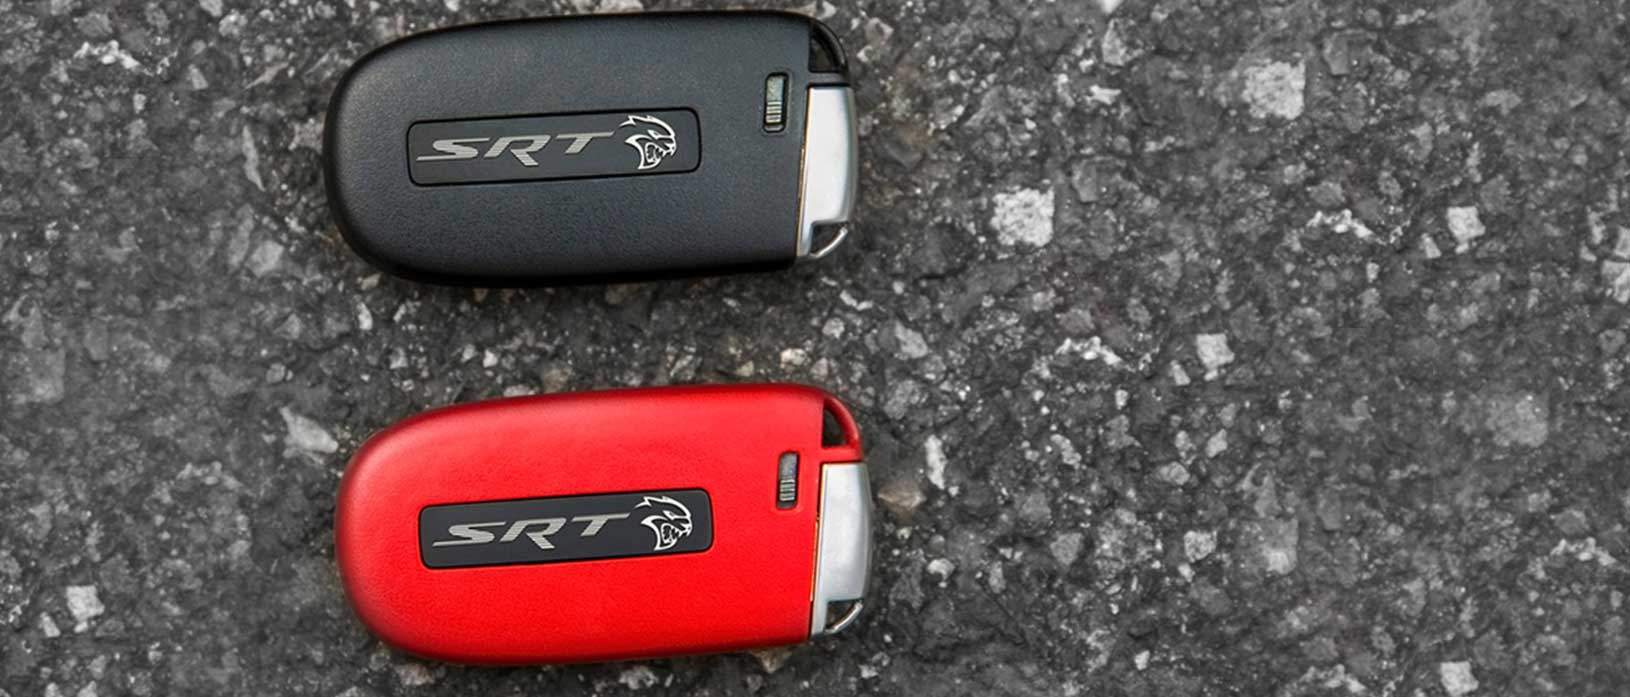 Get Keyed Up for Raw, Red Power